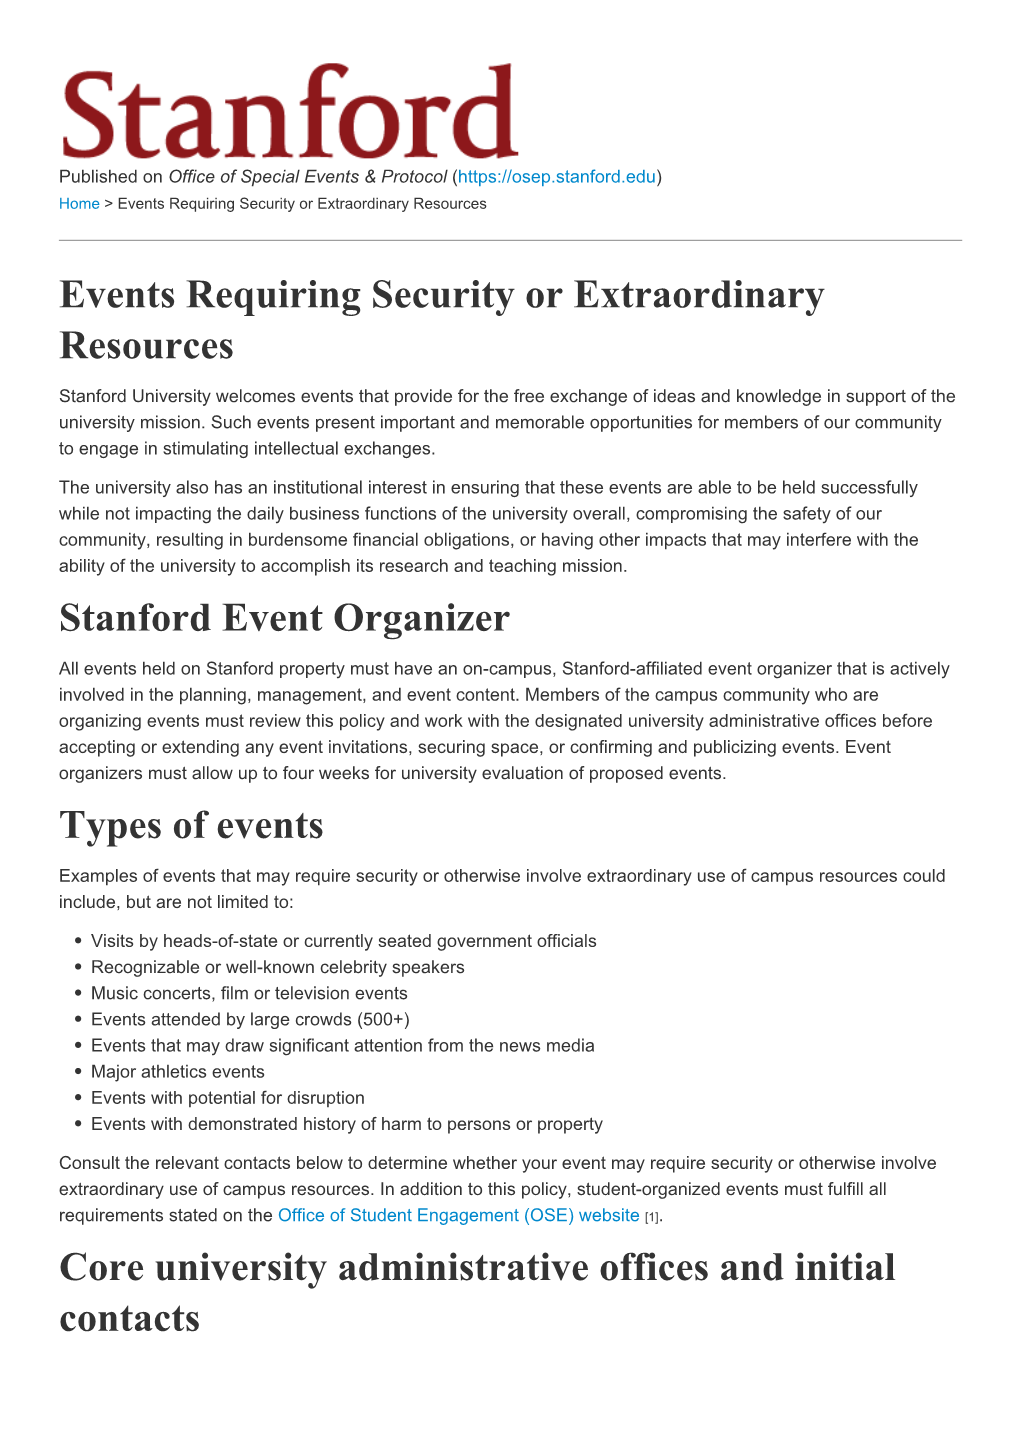 Events Requiring Security Or Extraordinary Resources